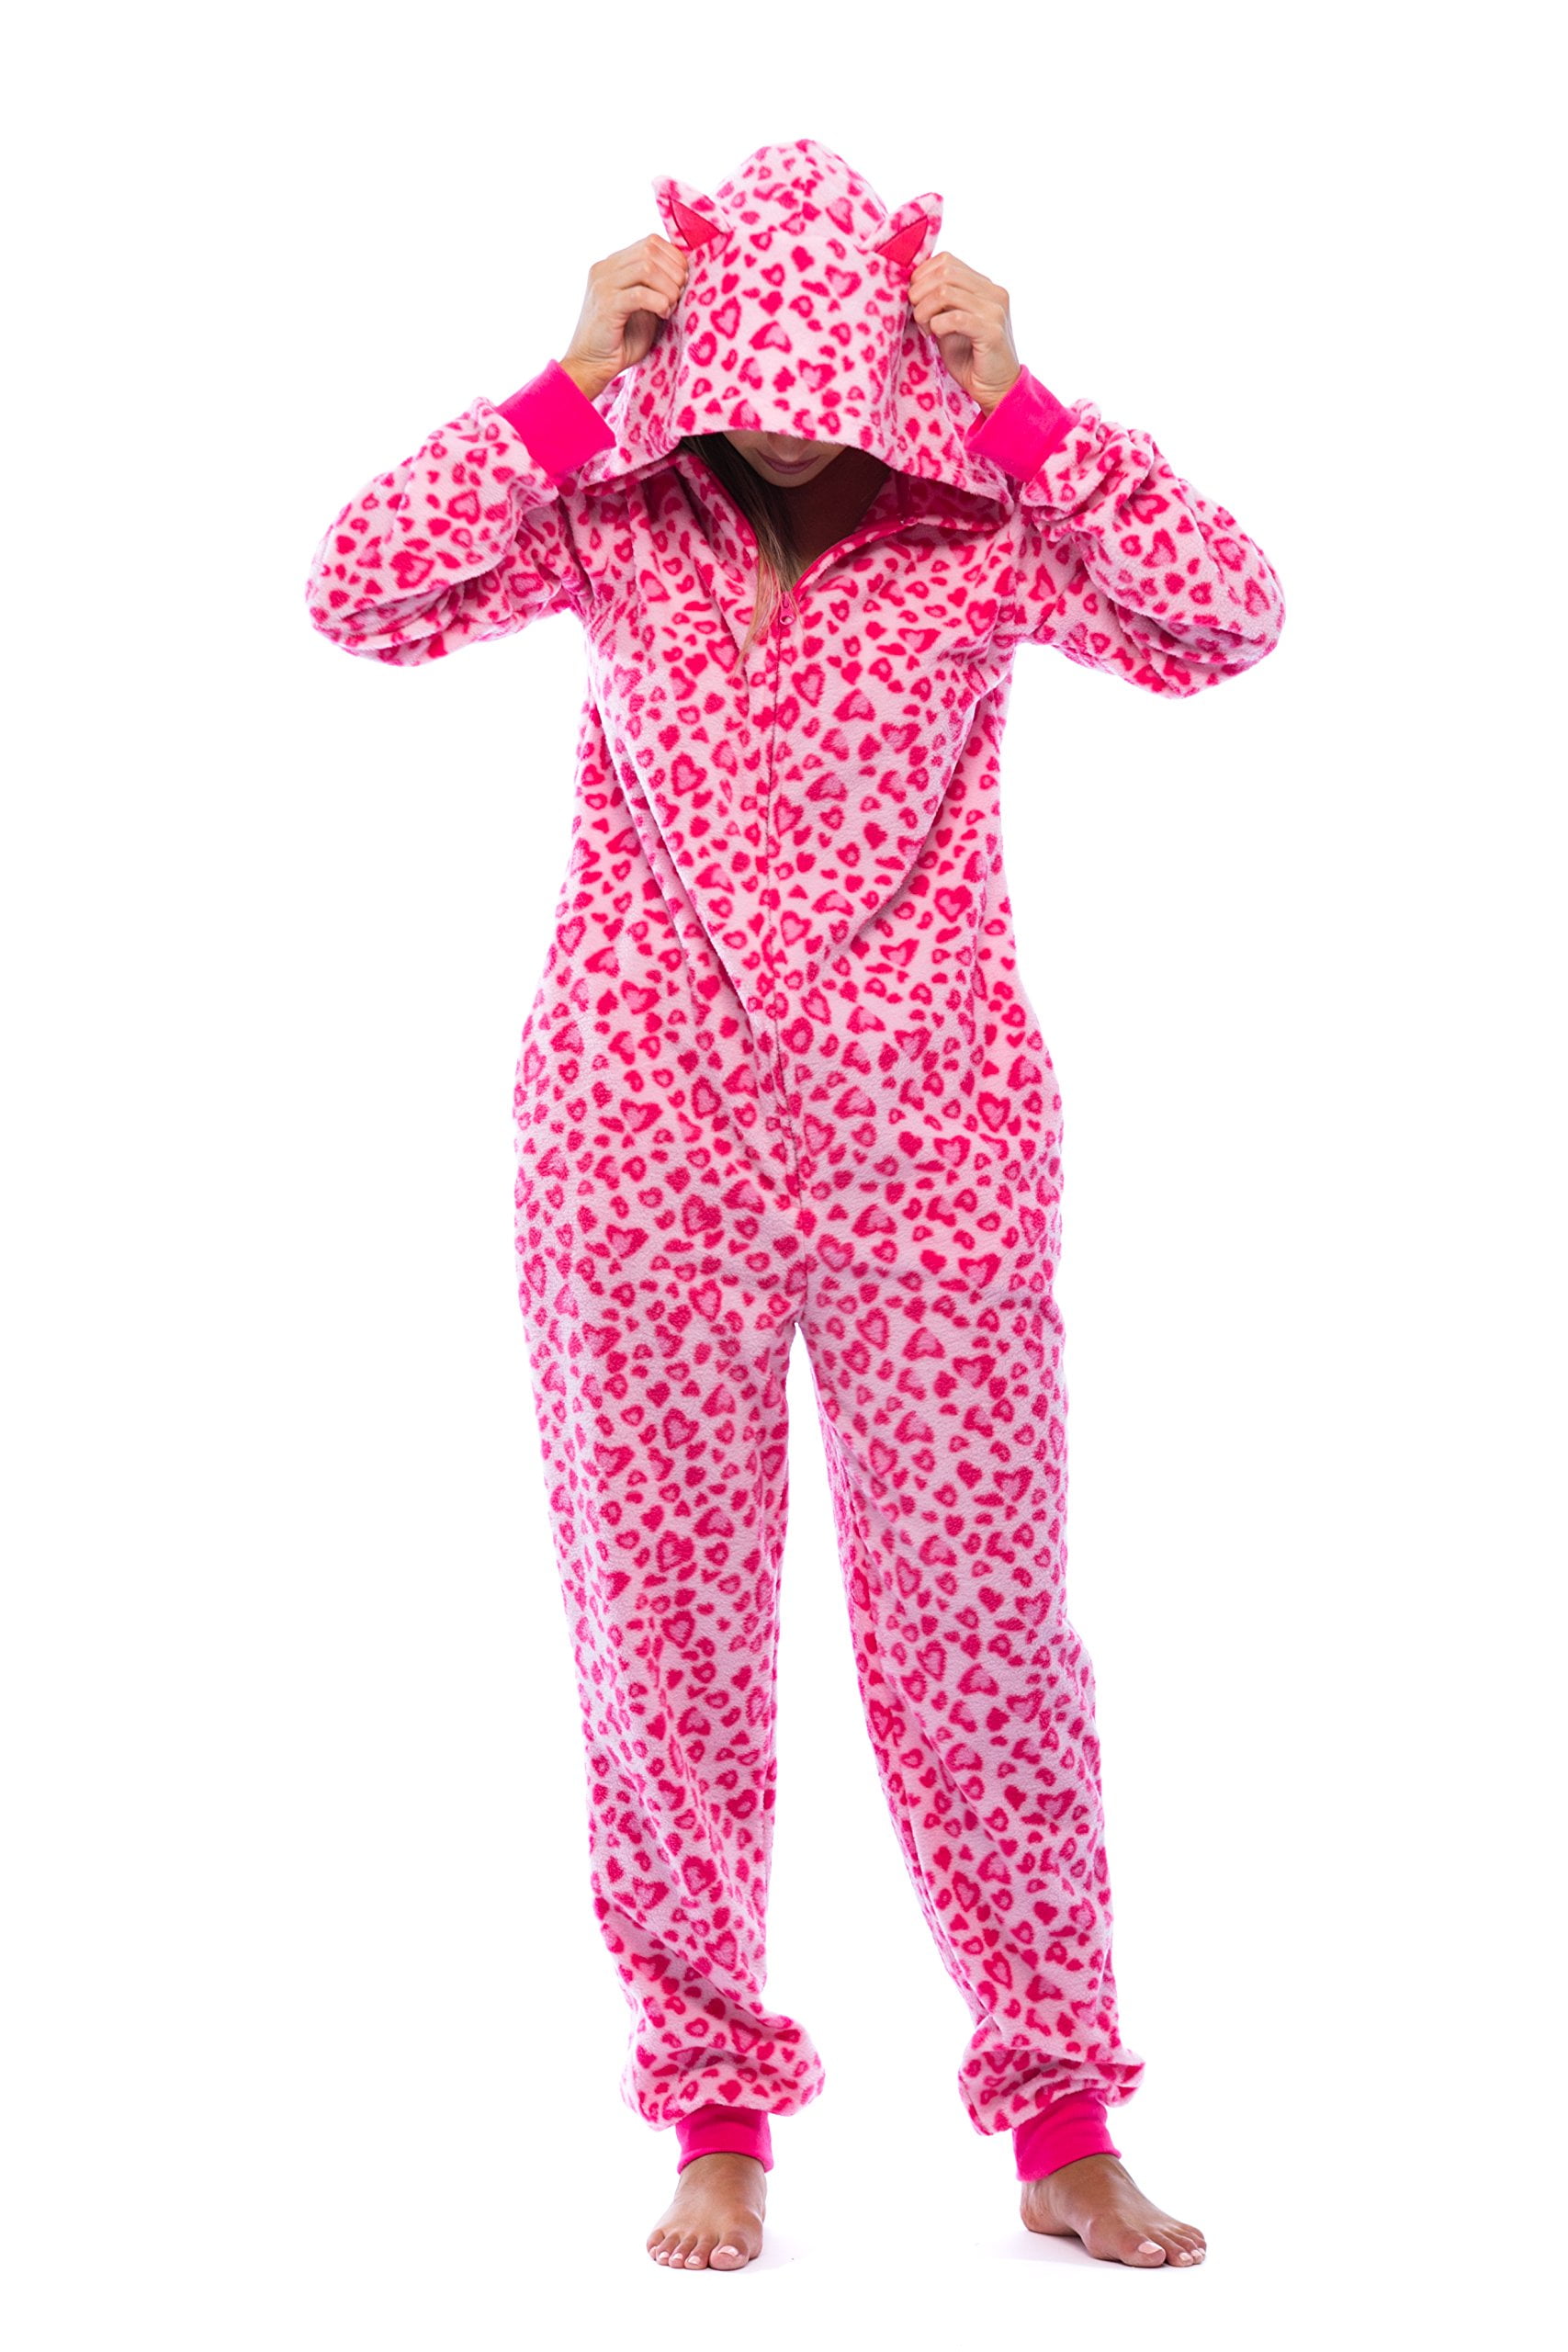 Just Love Adult Onesie with Animal Prints / Pajamas (Pink Leopard, Small)